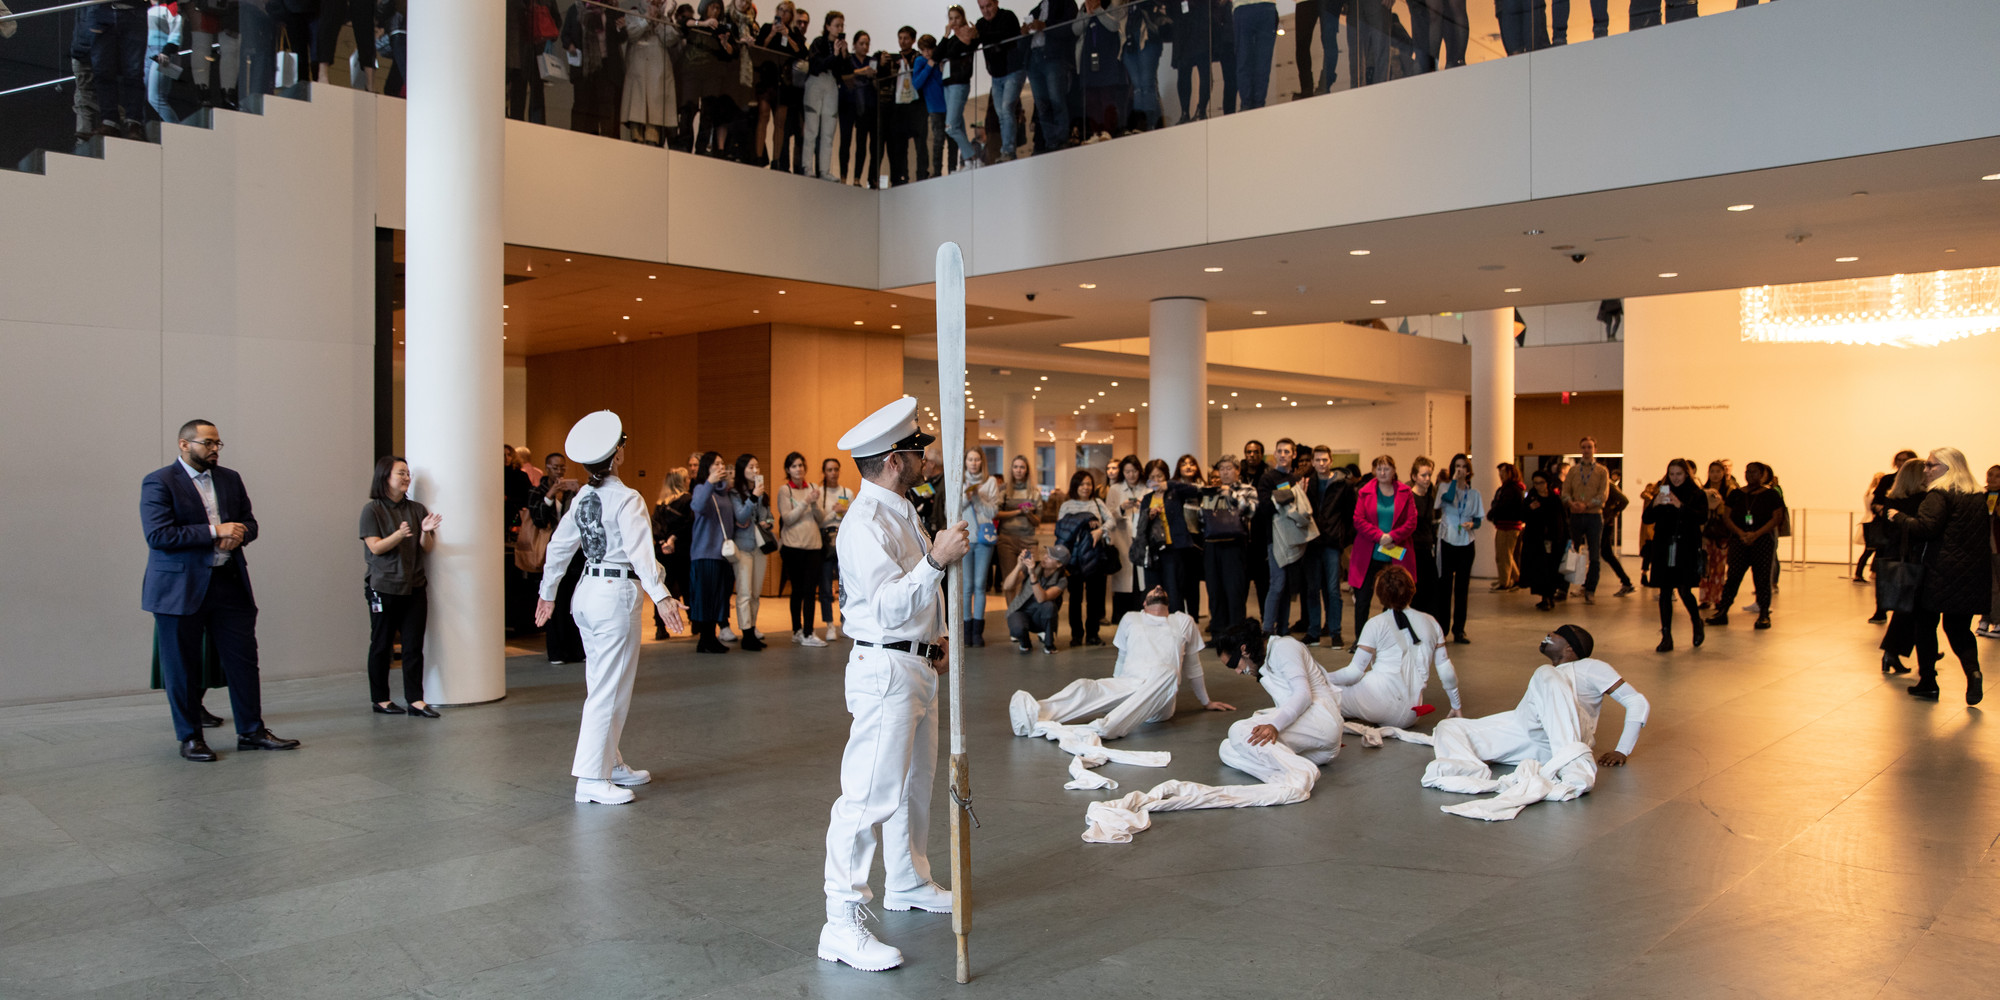 Pope.L. Dressing Up For Civil Rights. 2019. Performance, The Museum of Modern Art, New York, November 21, 2019. Acquired in part through the generosity of Jill and Peter Kraus, Anne and Joel S. Ehrenkranz, The Contemporary Arts Council of The Museum of Modern Art, The Jill and Peter Kraus Media and Performance Acquisition Fund, and Jill and Peter Kraus in honor of Michael Lynne. © Pope.L. Courtesy of the artist and Mitchell-Innes &amp; Nash, New York